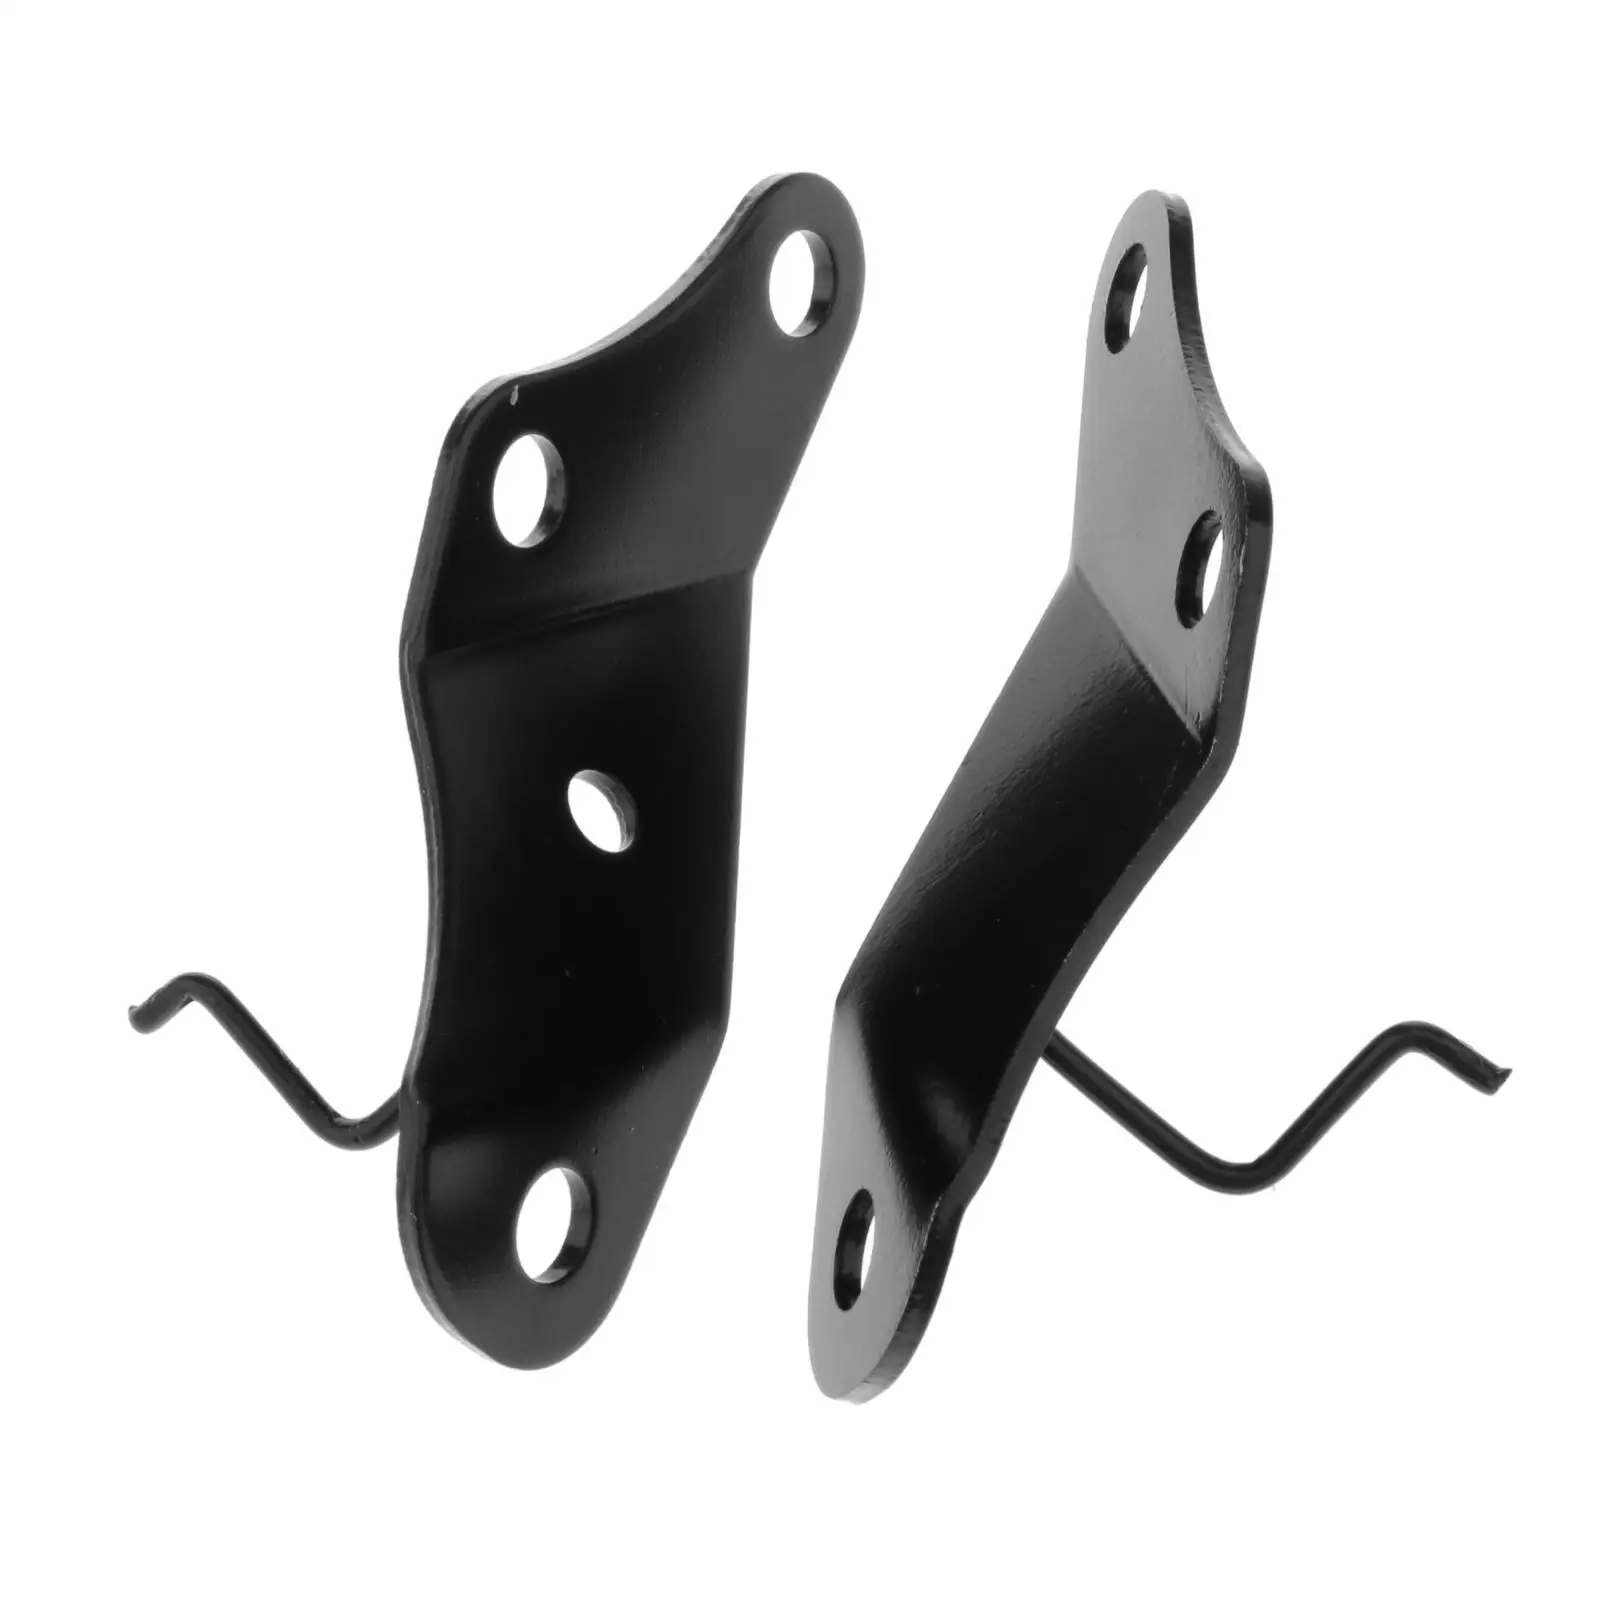 Engine Motor Mount Stay, Made of Iron Material Compatible with 1987-2004 Yamaha